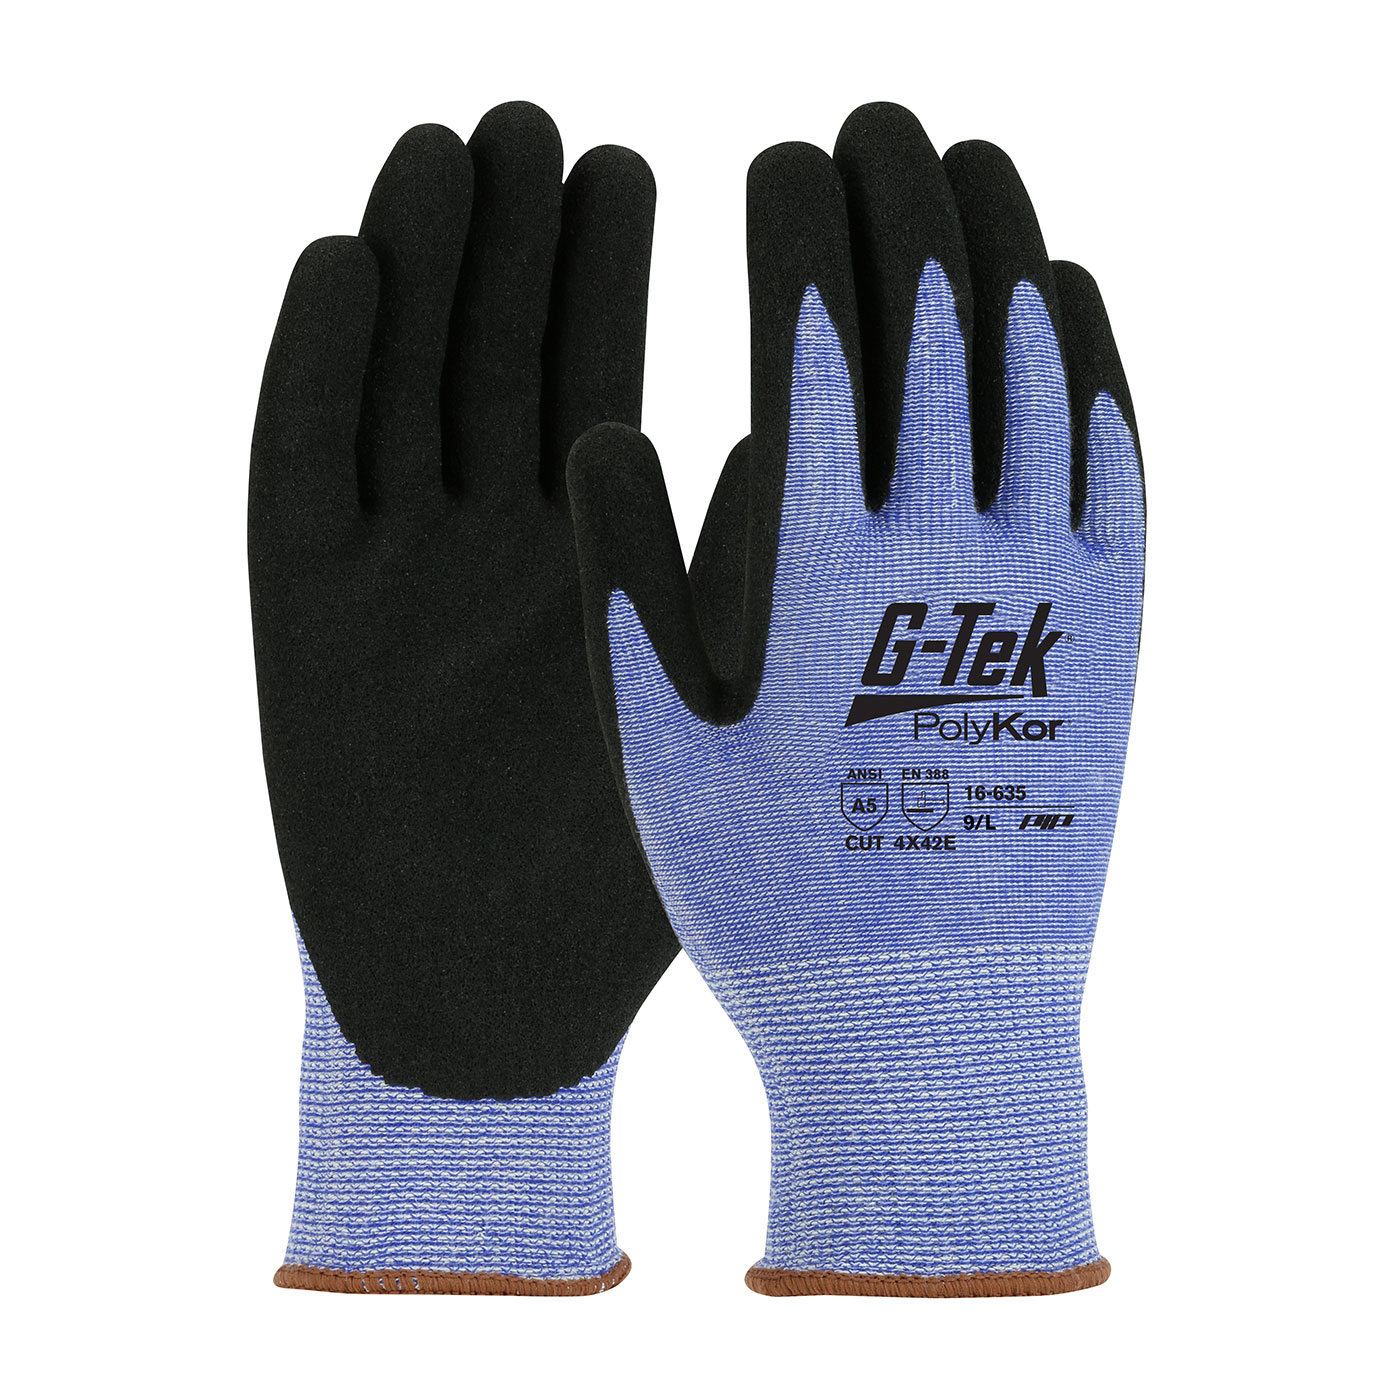 PIP 16-635/M G-Tek PolyKor Seamless Knit PolyKor Blended Glove with Nitrile Coated MicroSurface Grip on Palm & Fingers - Medium PID-16635M